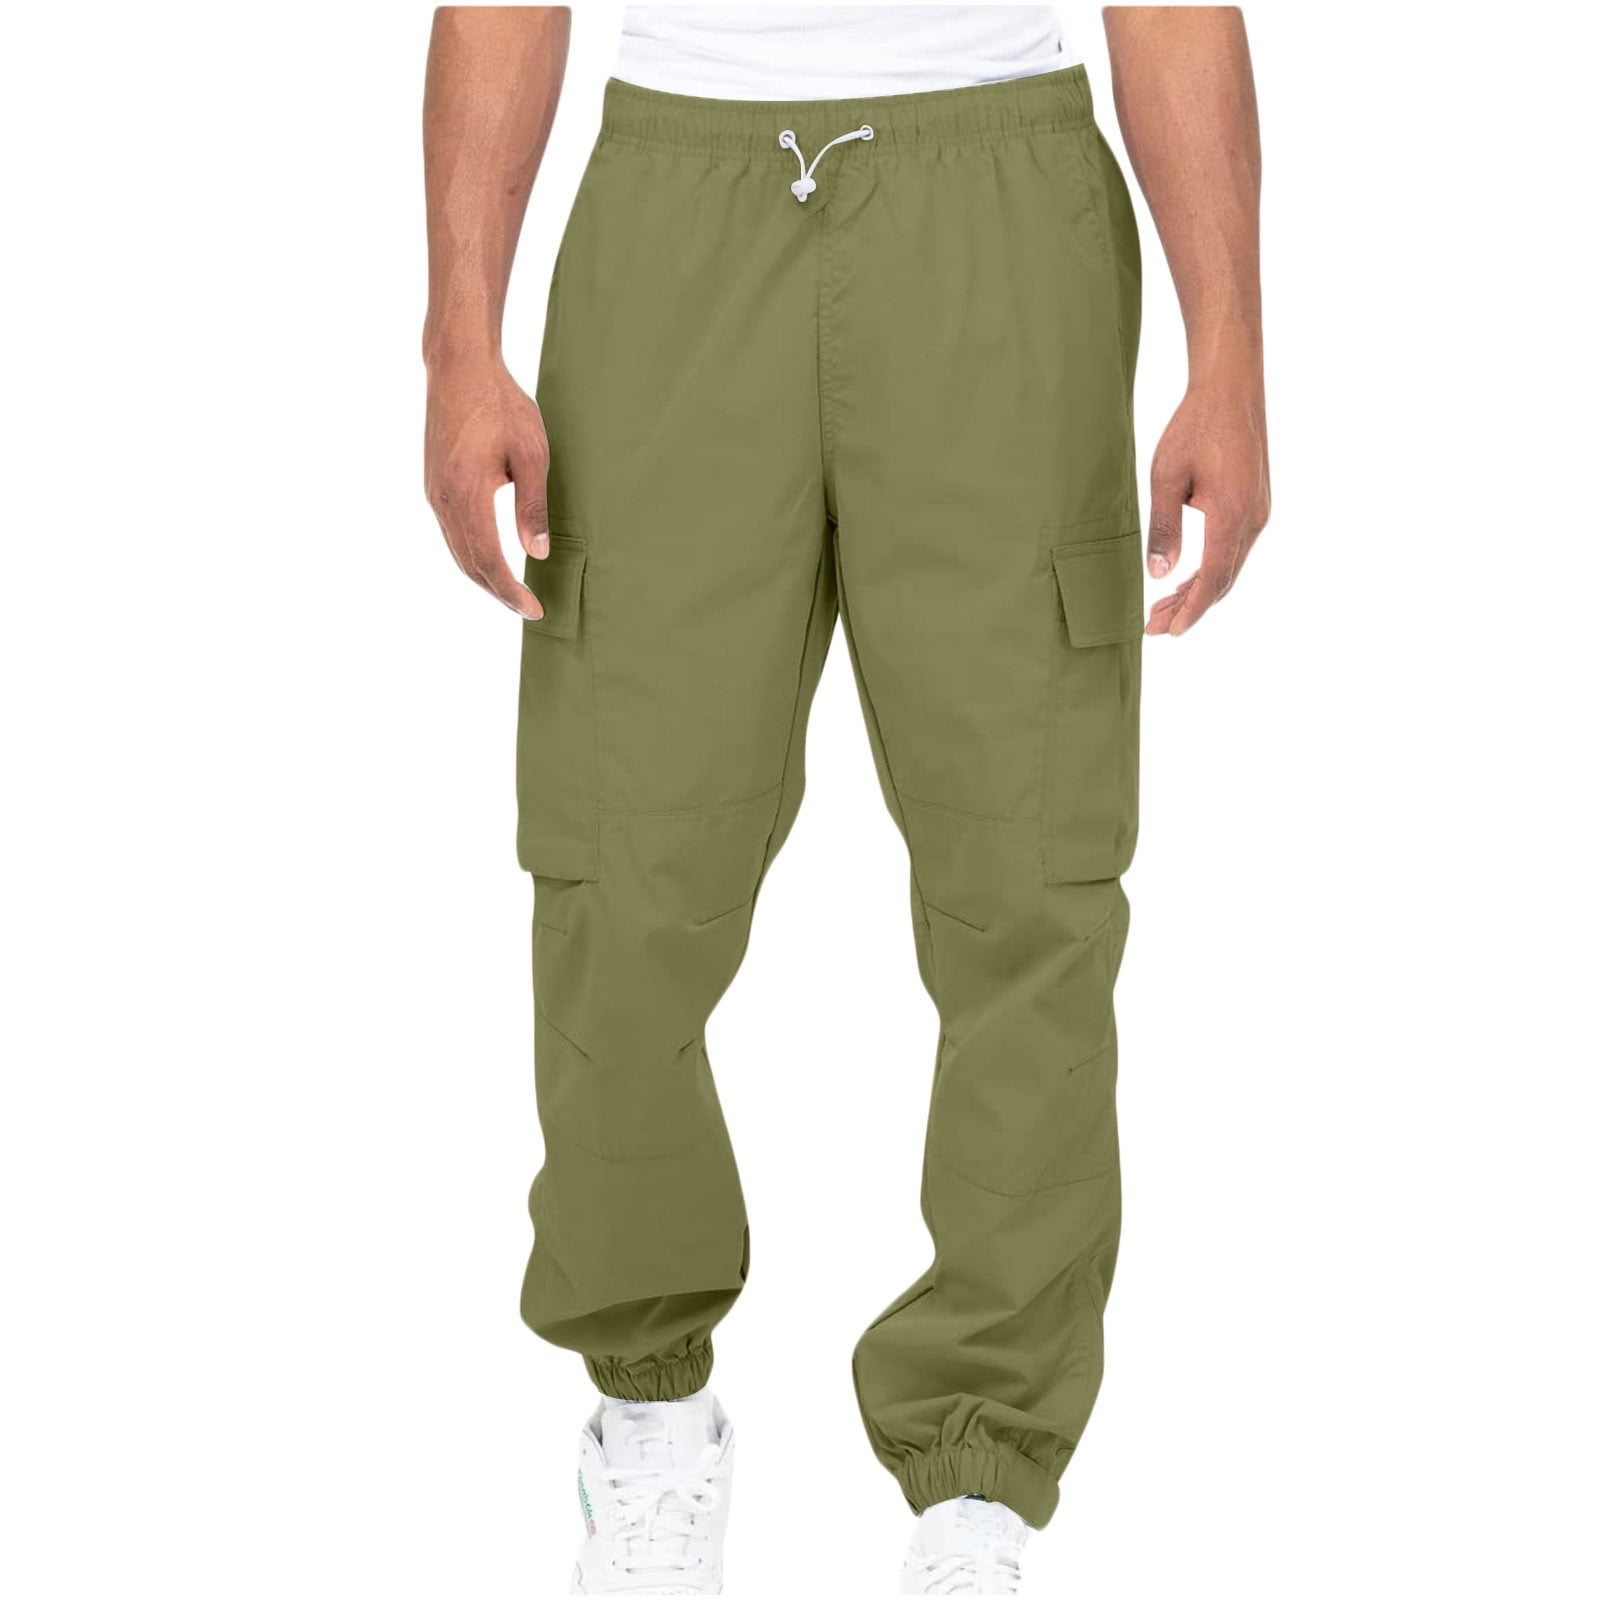 Kayannuo Cargo Pants for Men Deal Men Solid Casual Multiple Pockets ...